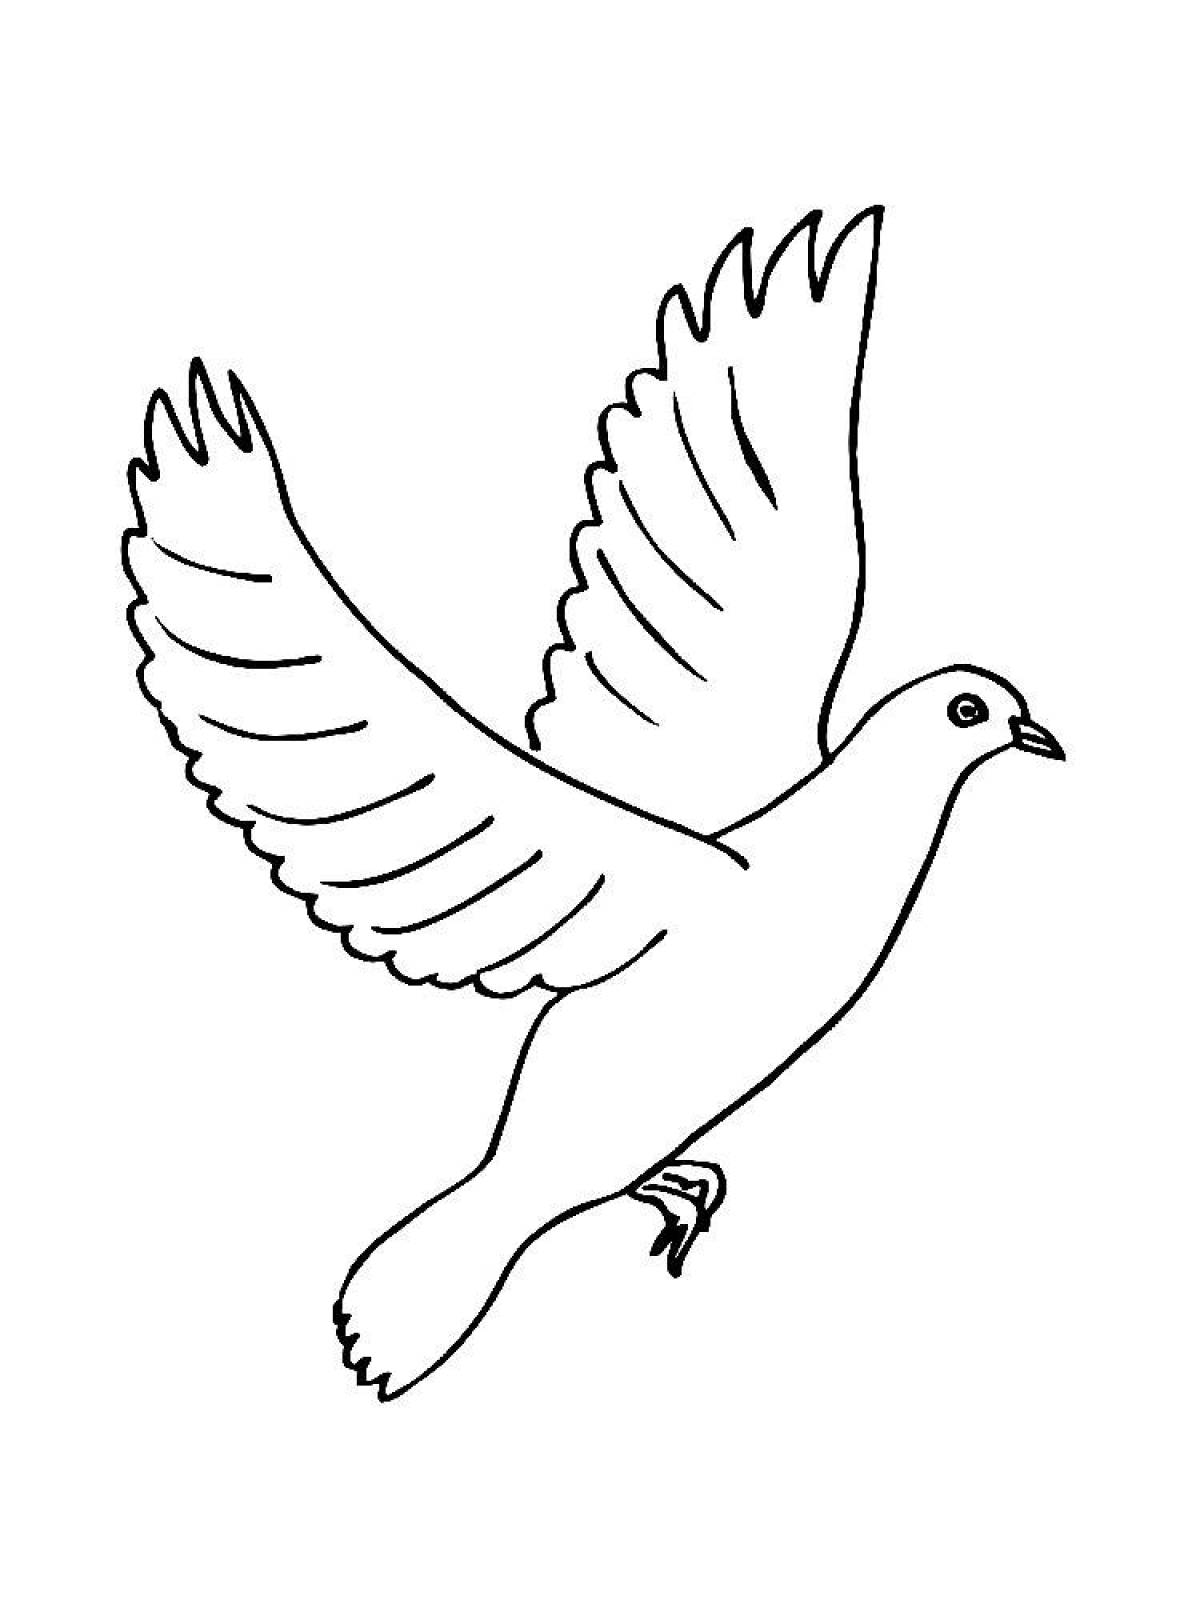 Awesome dove coloring pages for kids